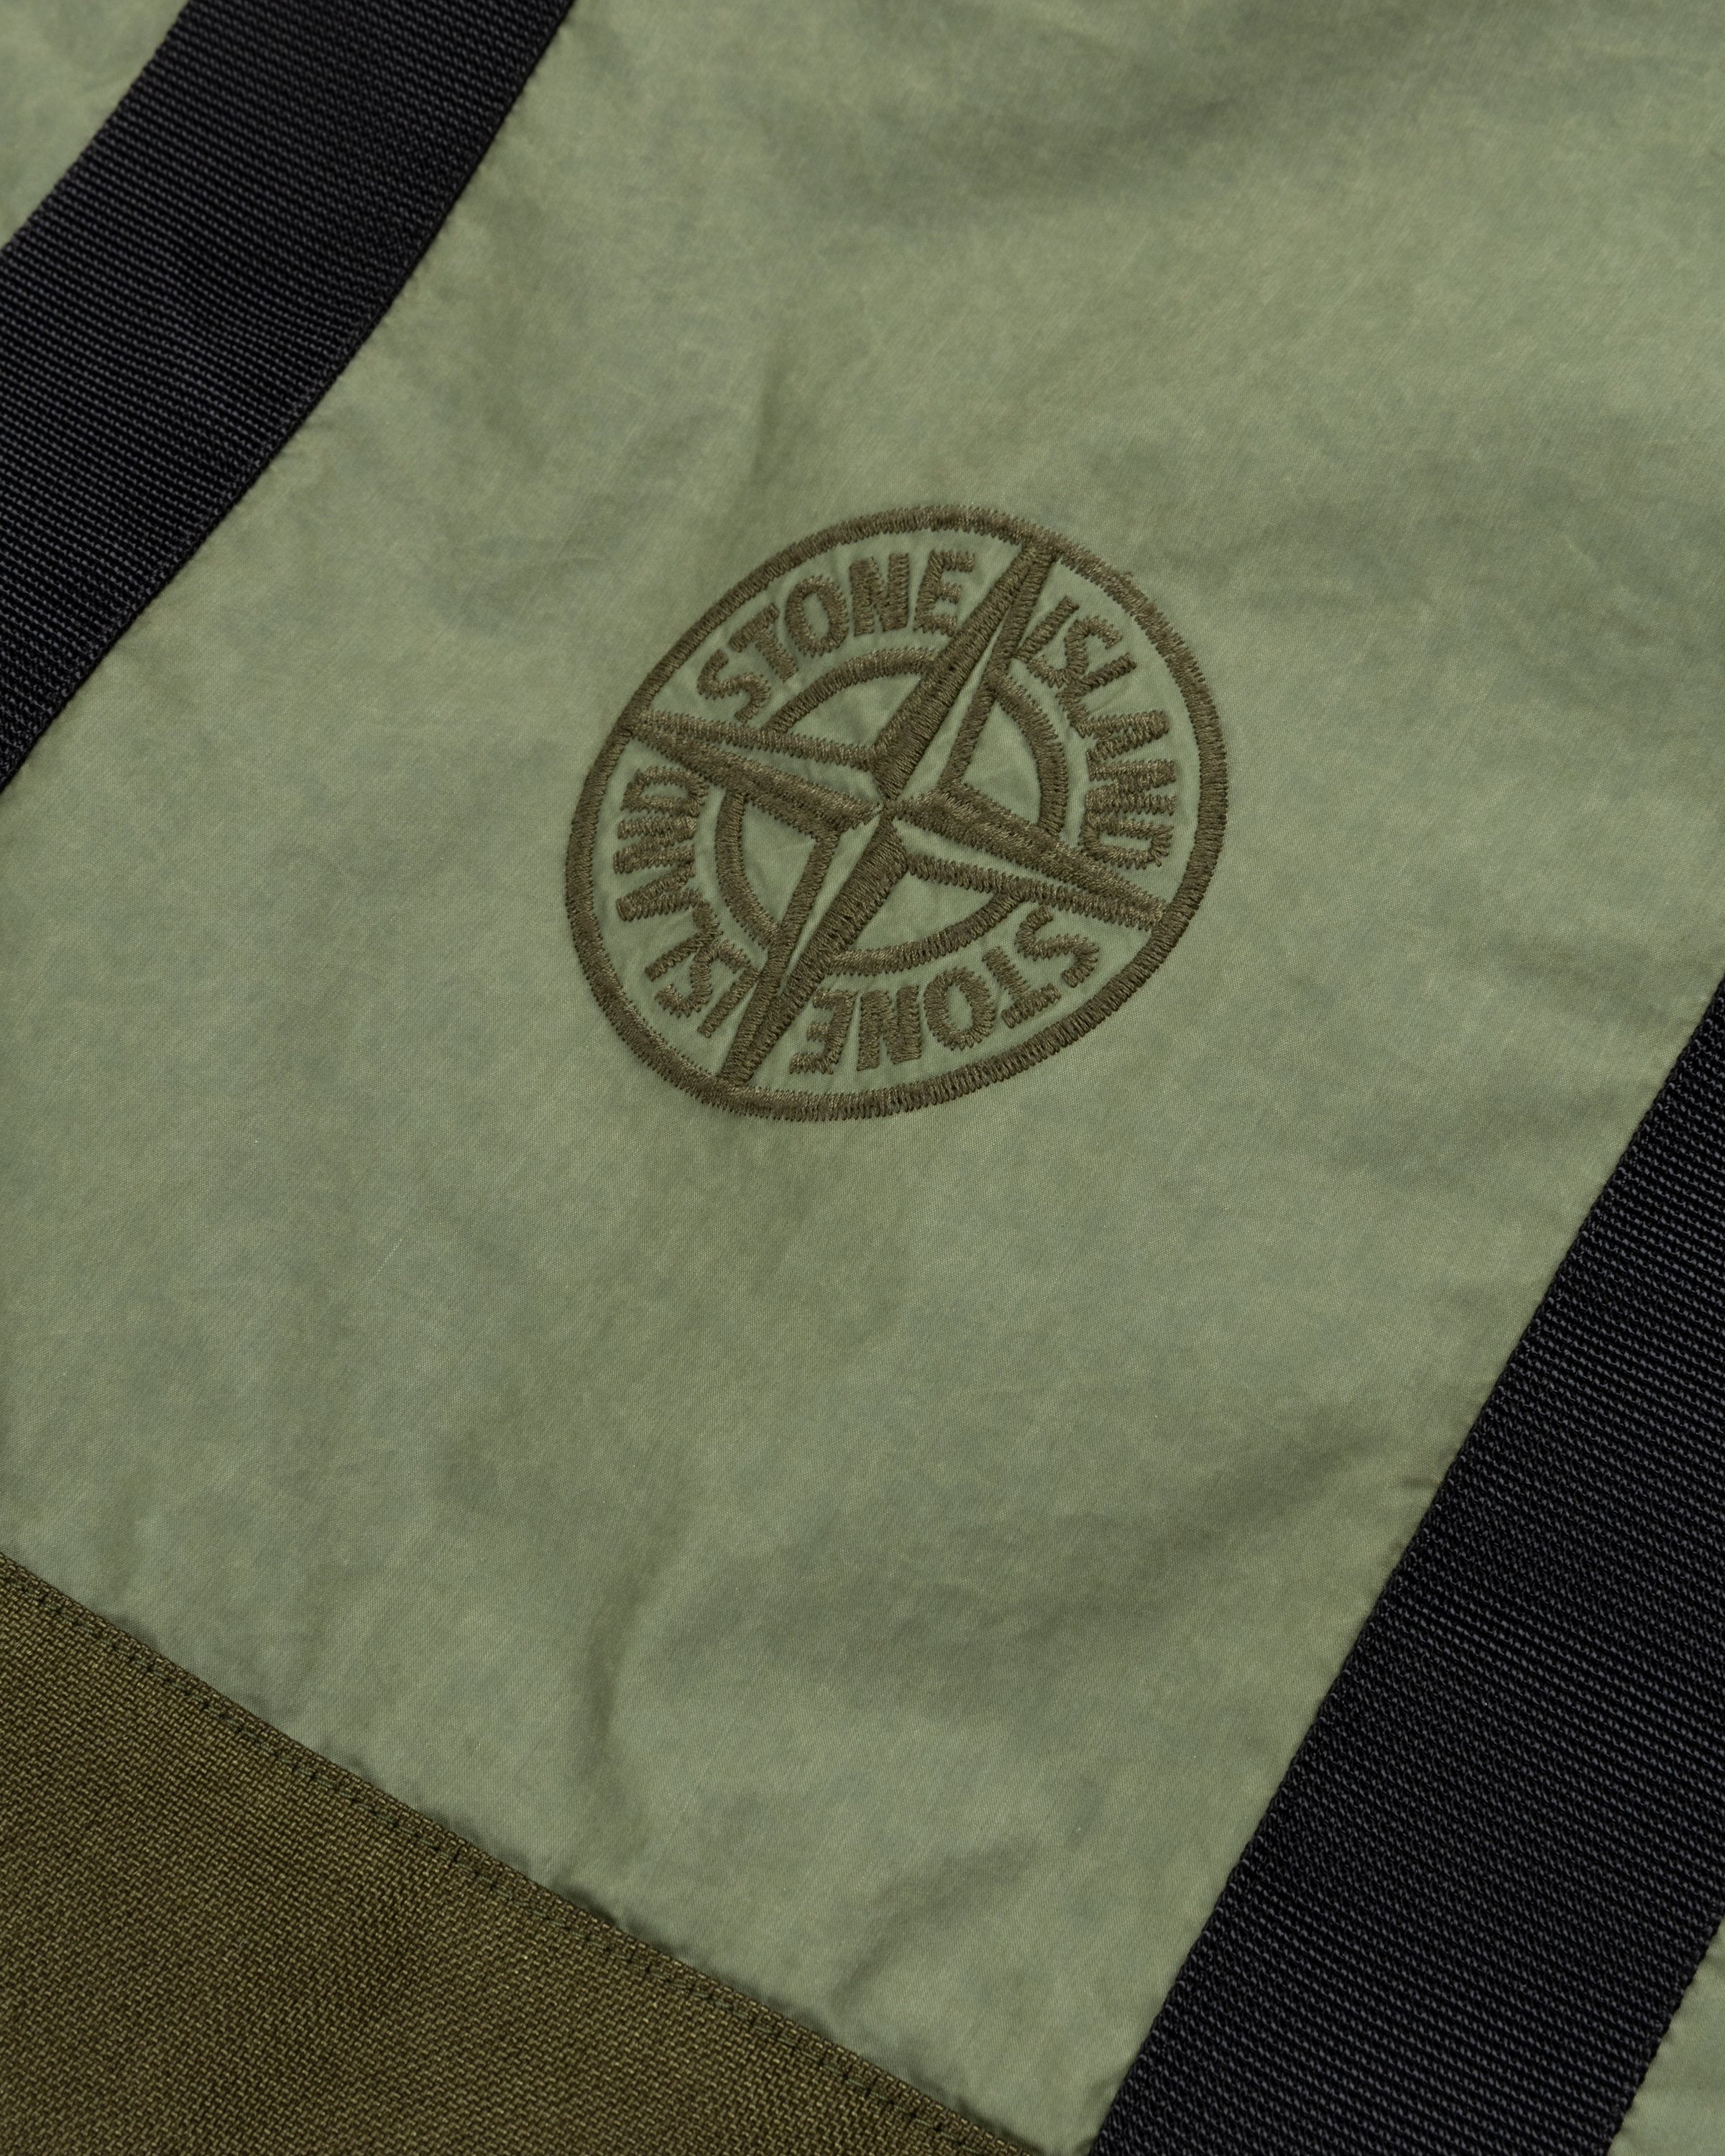 Stone Island - 91475 Garment-Dyed Tote Bag Olive - Accessories - Green - Image 7